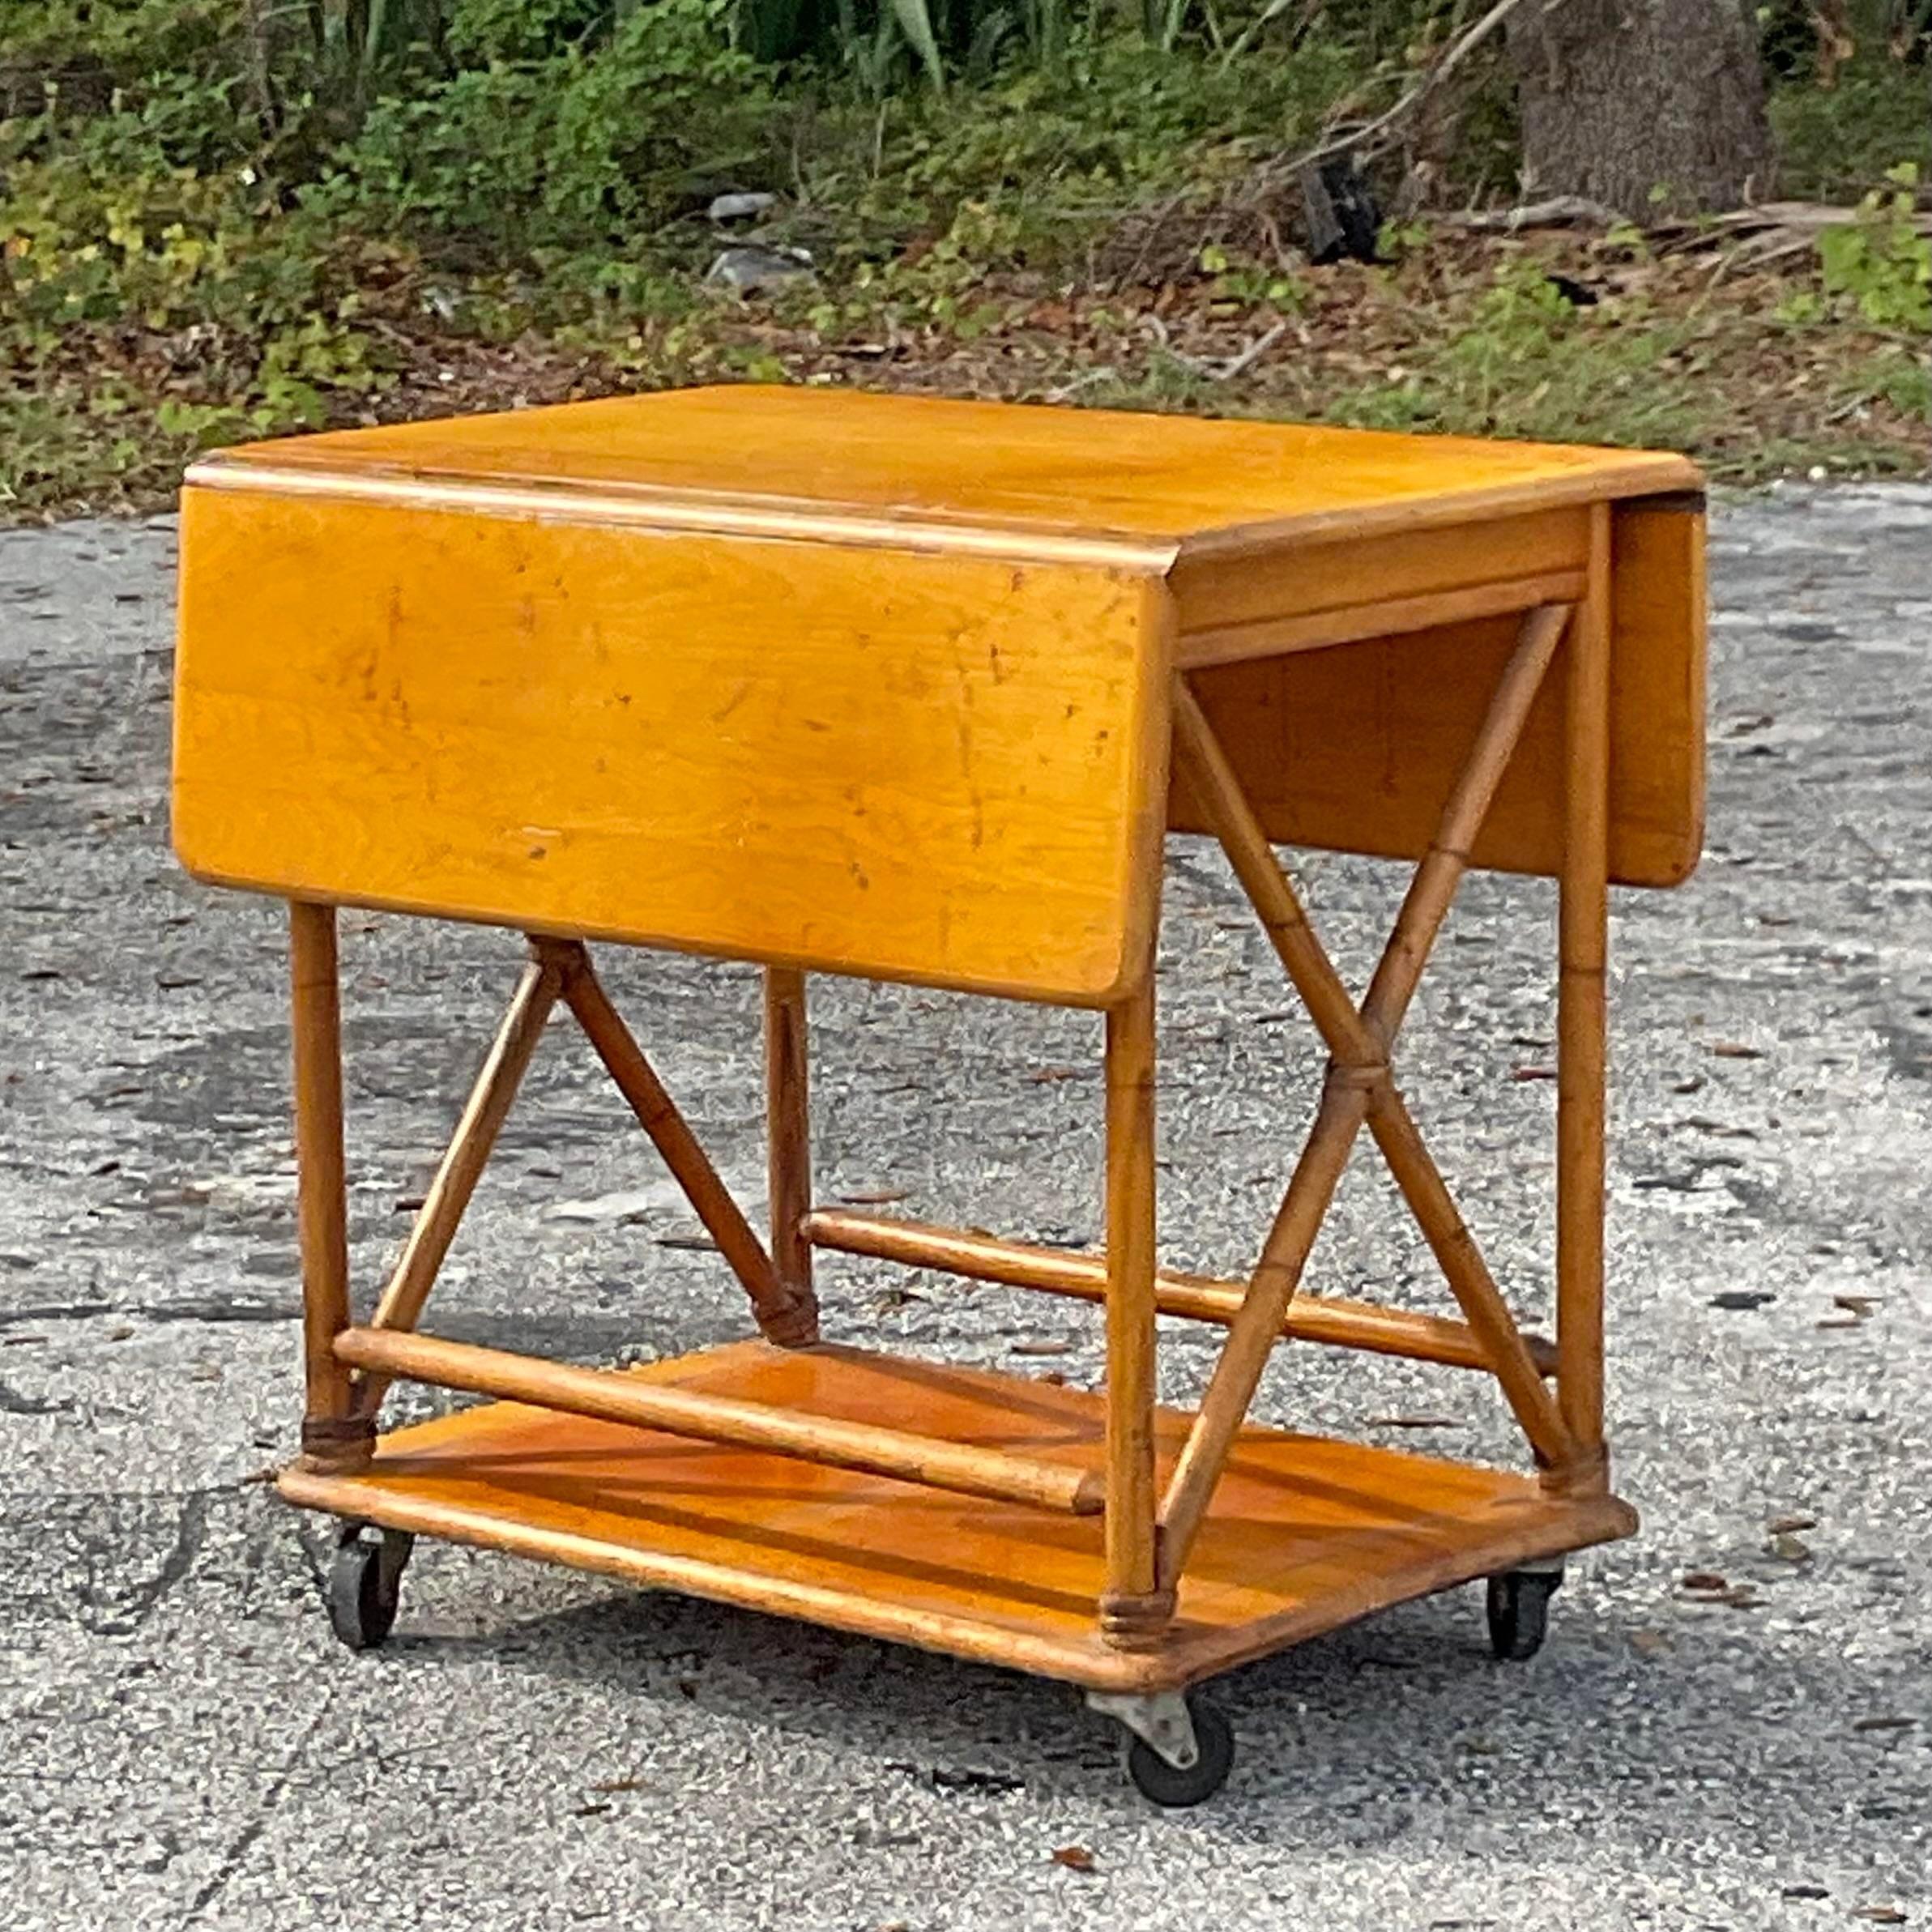 A fabulous vintage MCM bar cart. Made by the iconic Heywood Wakefield and tagged on the bottom. Two drop leaf panels for extended surface area. Acquired from a Palm Beach estate.

36.75 extended top